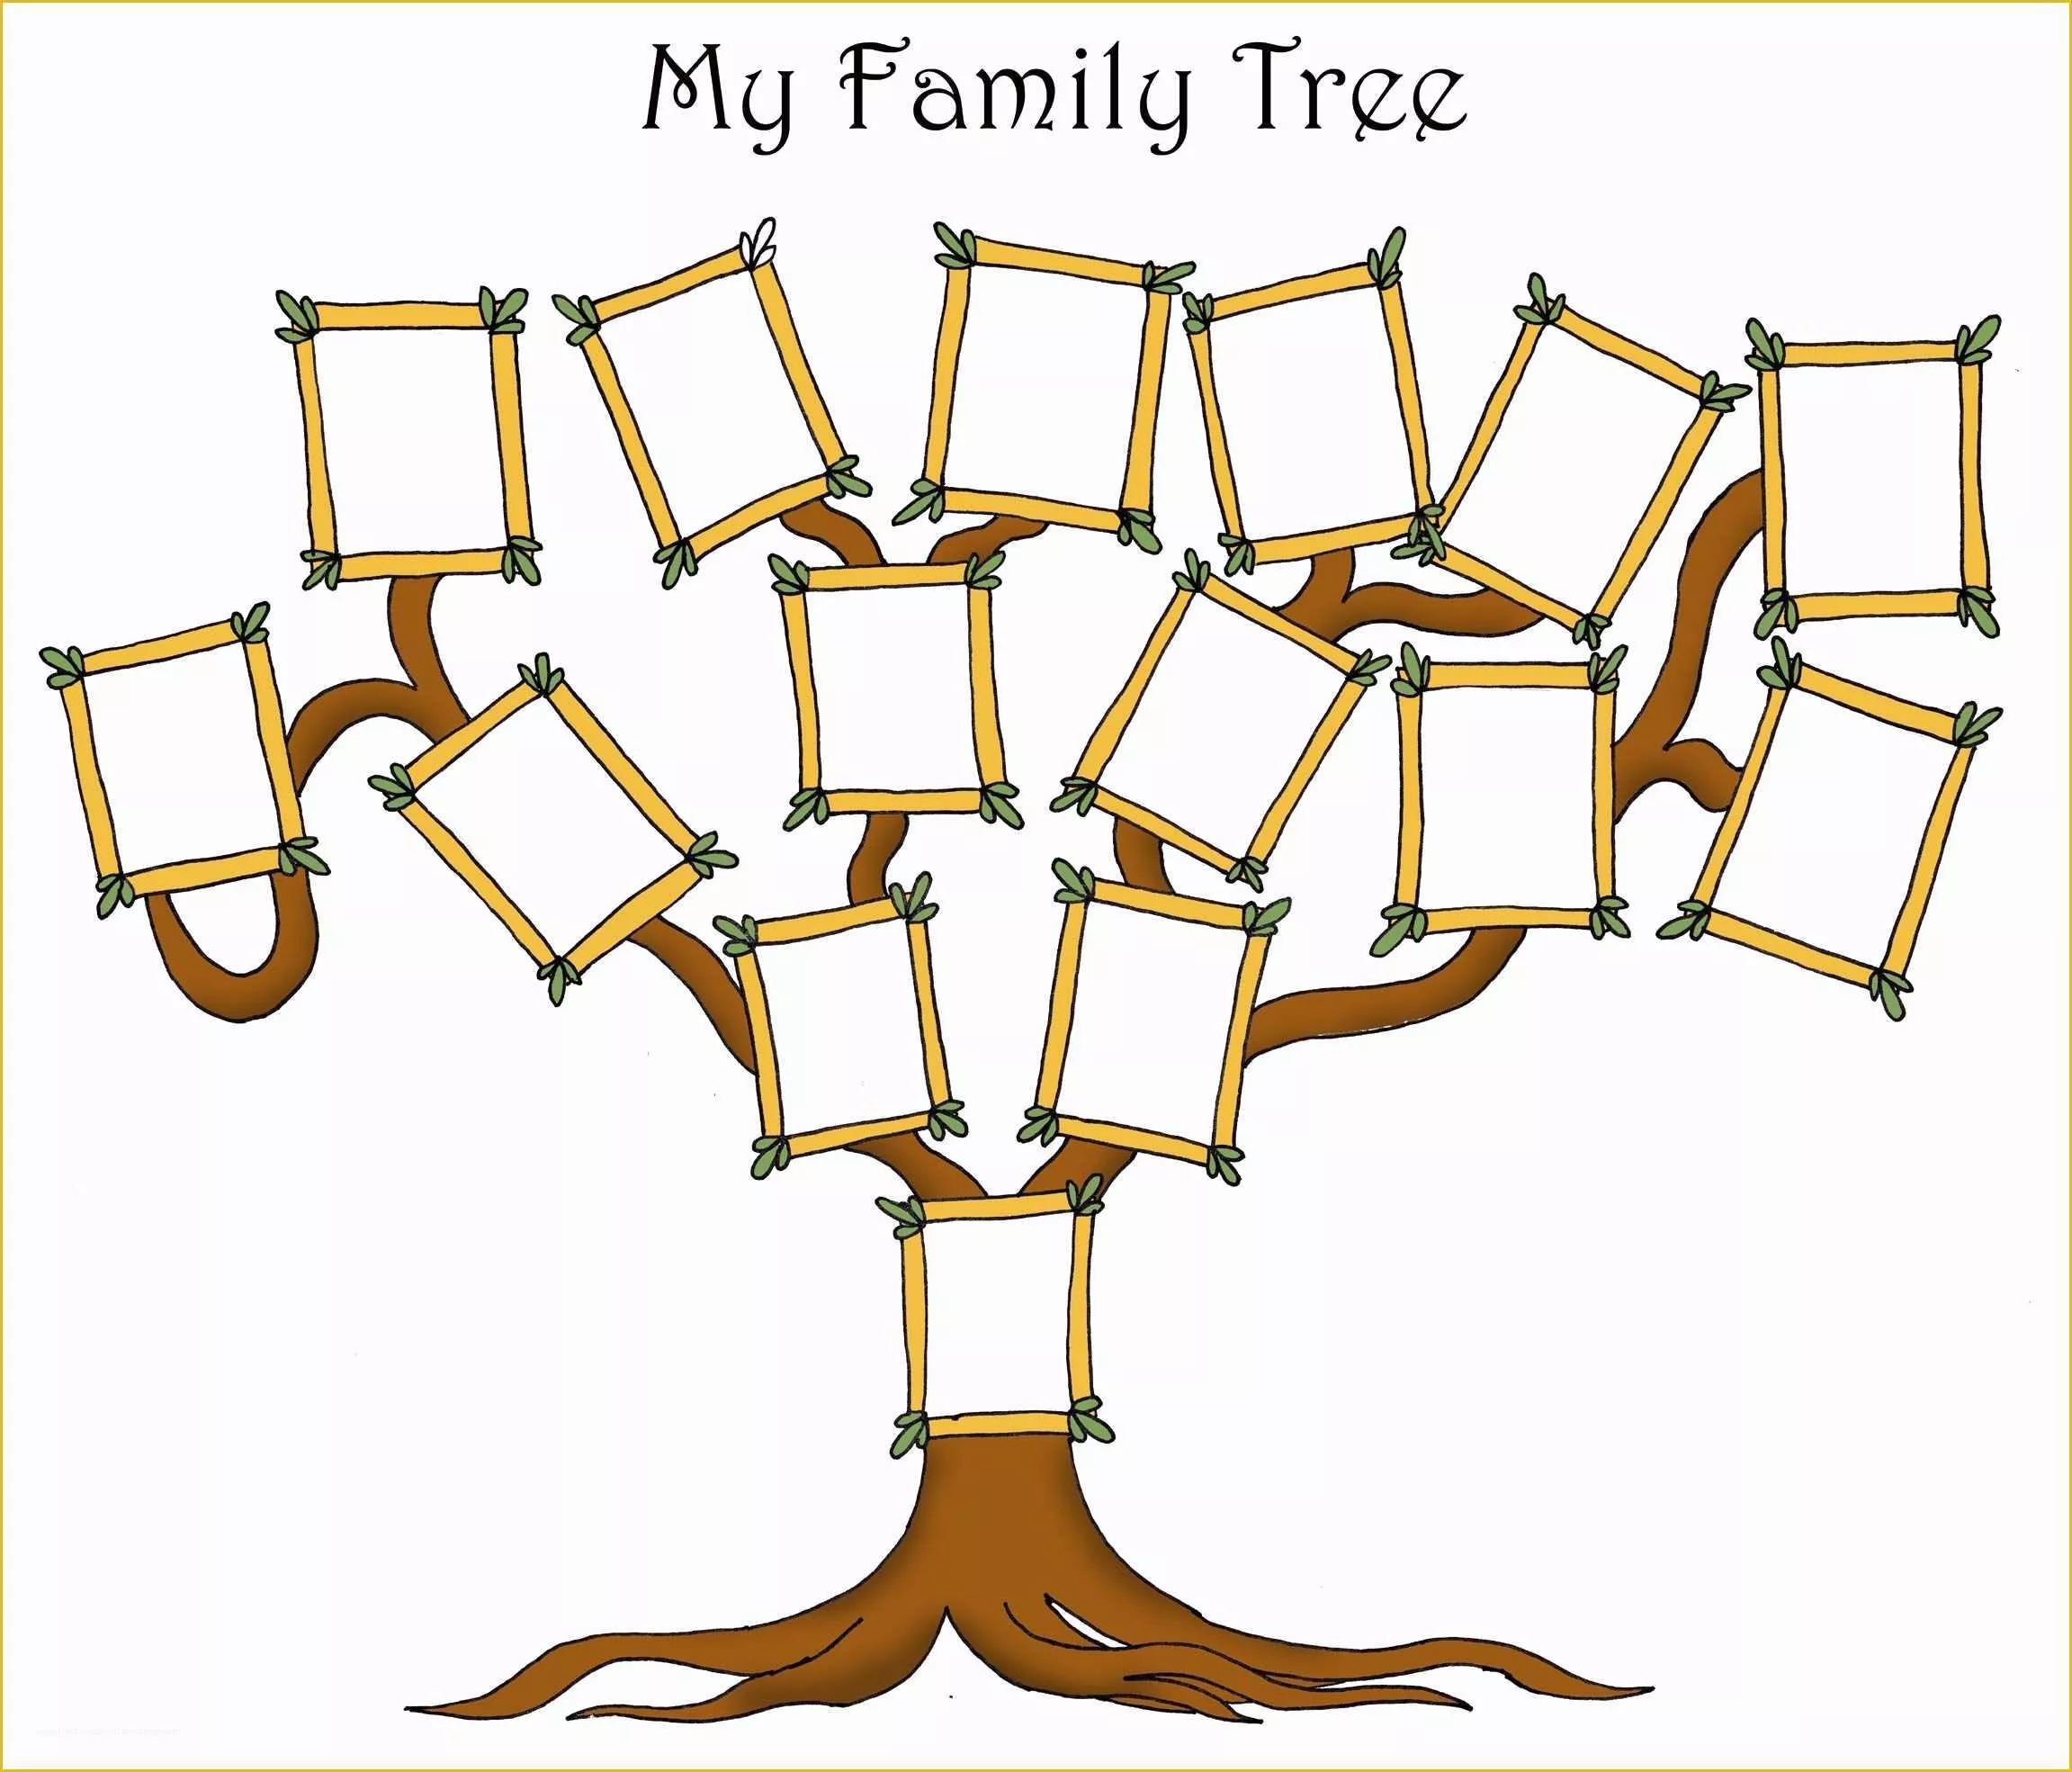 Free Tree Map Templates Of Free Editable Family Tree Template Daily Roabox